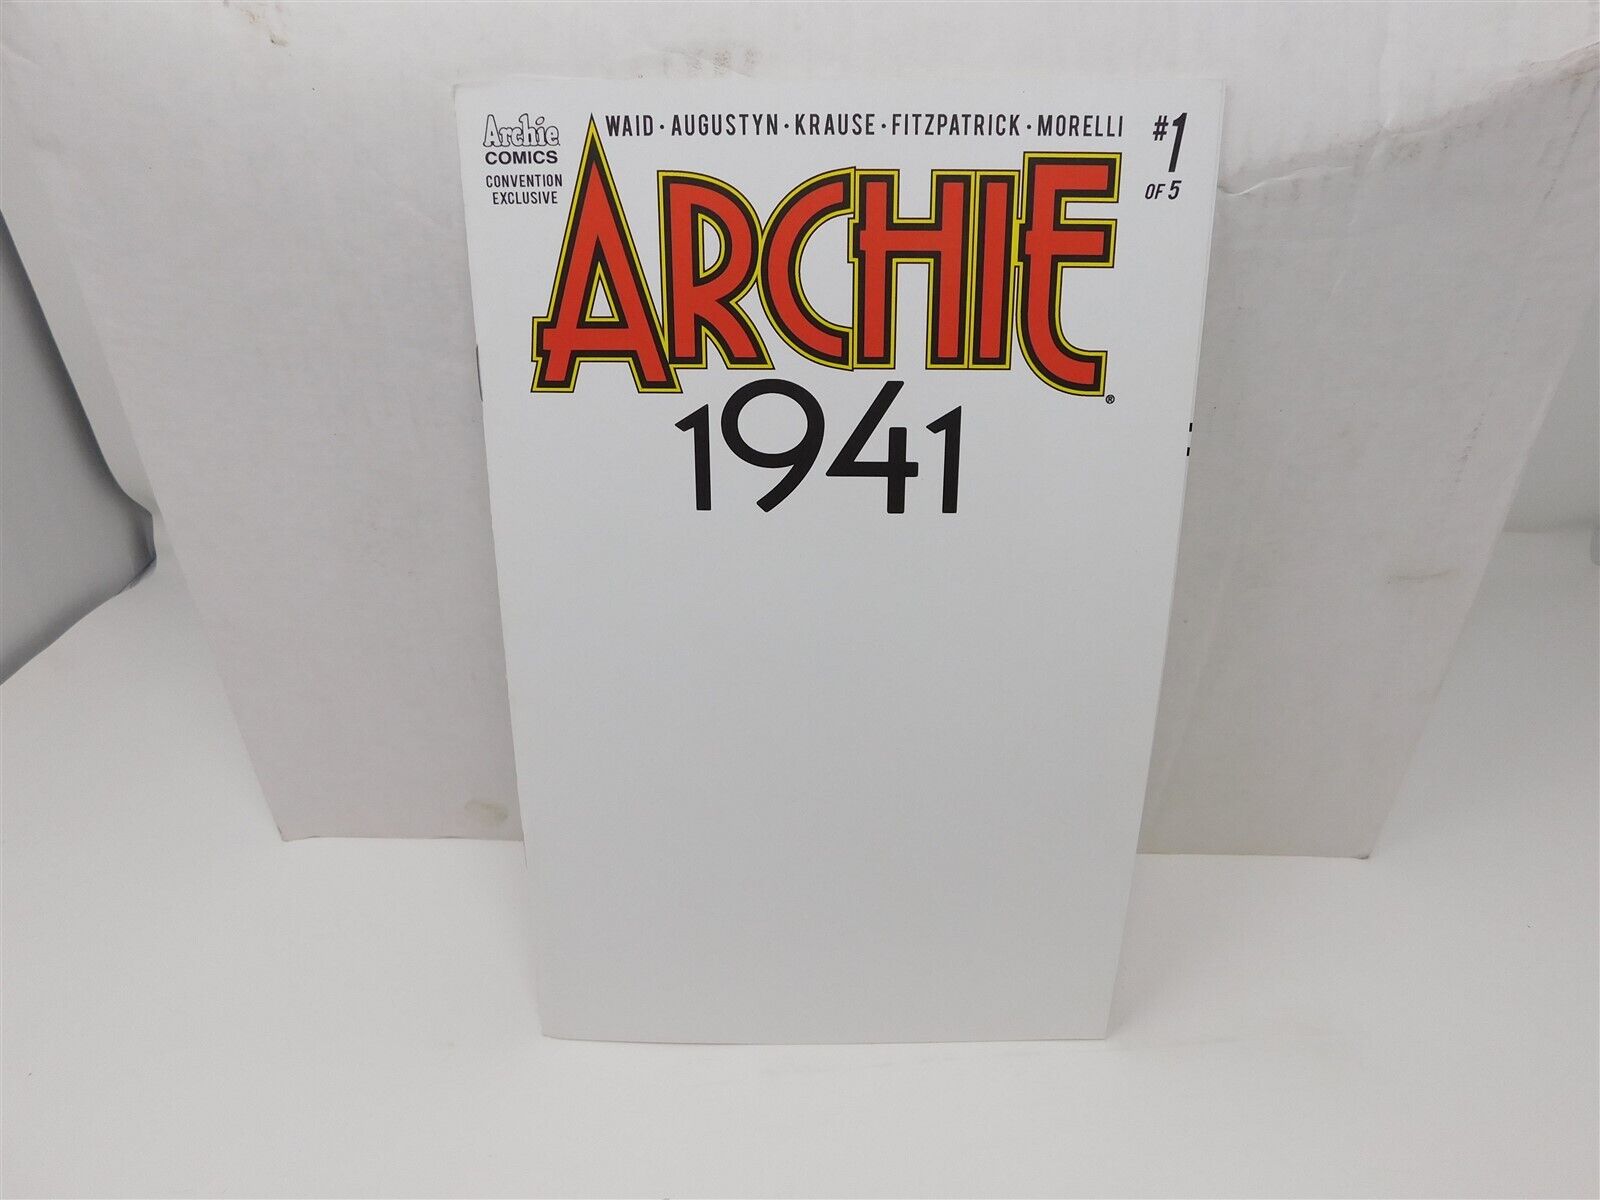 ARCHIE 1941 #1 ARCHIE COMIC NYCC EXCLUSIVE VARIANT COVER WAID AUGUSTYN 2018 VF